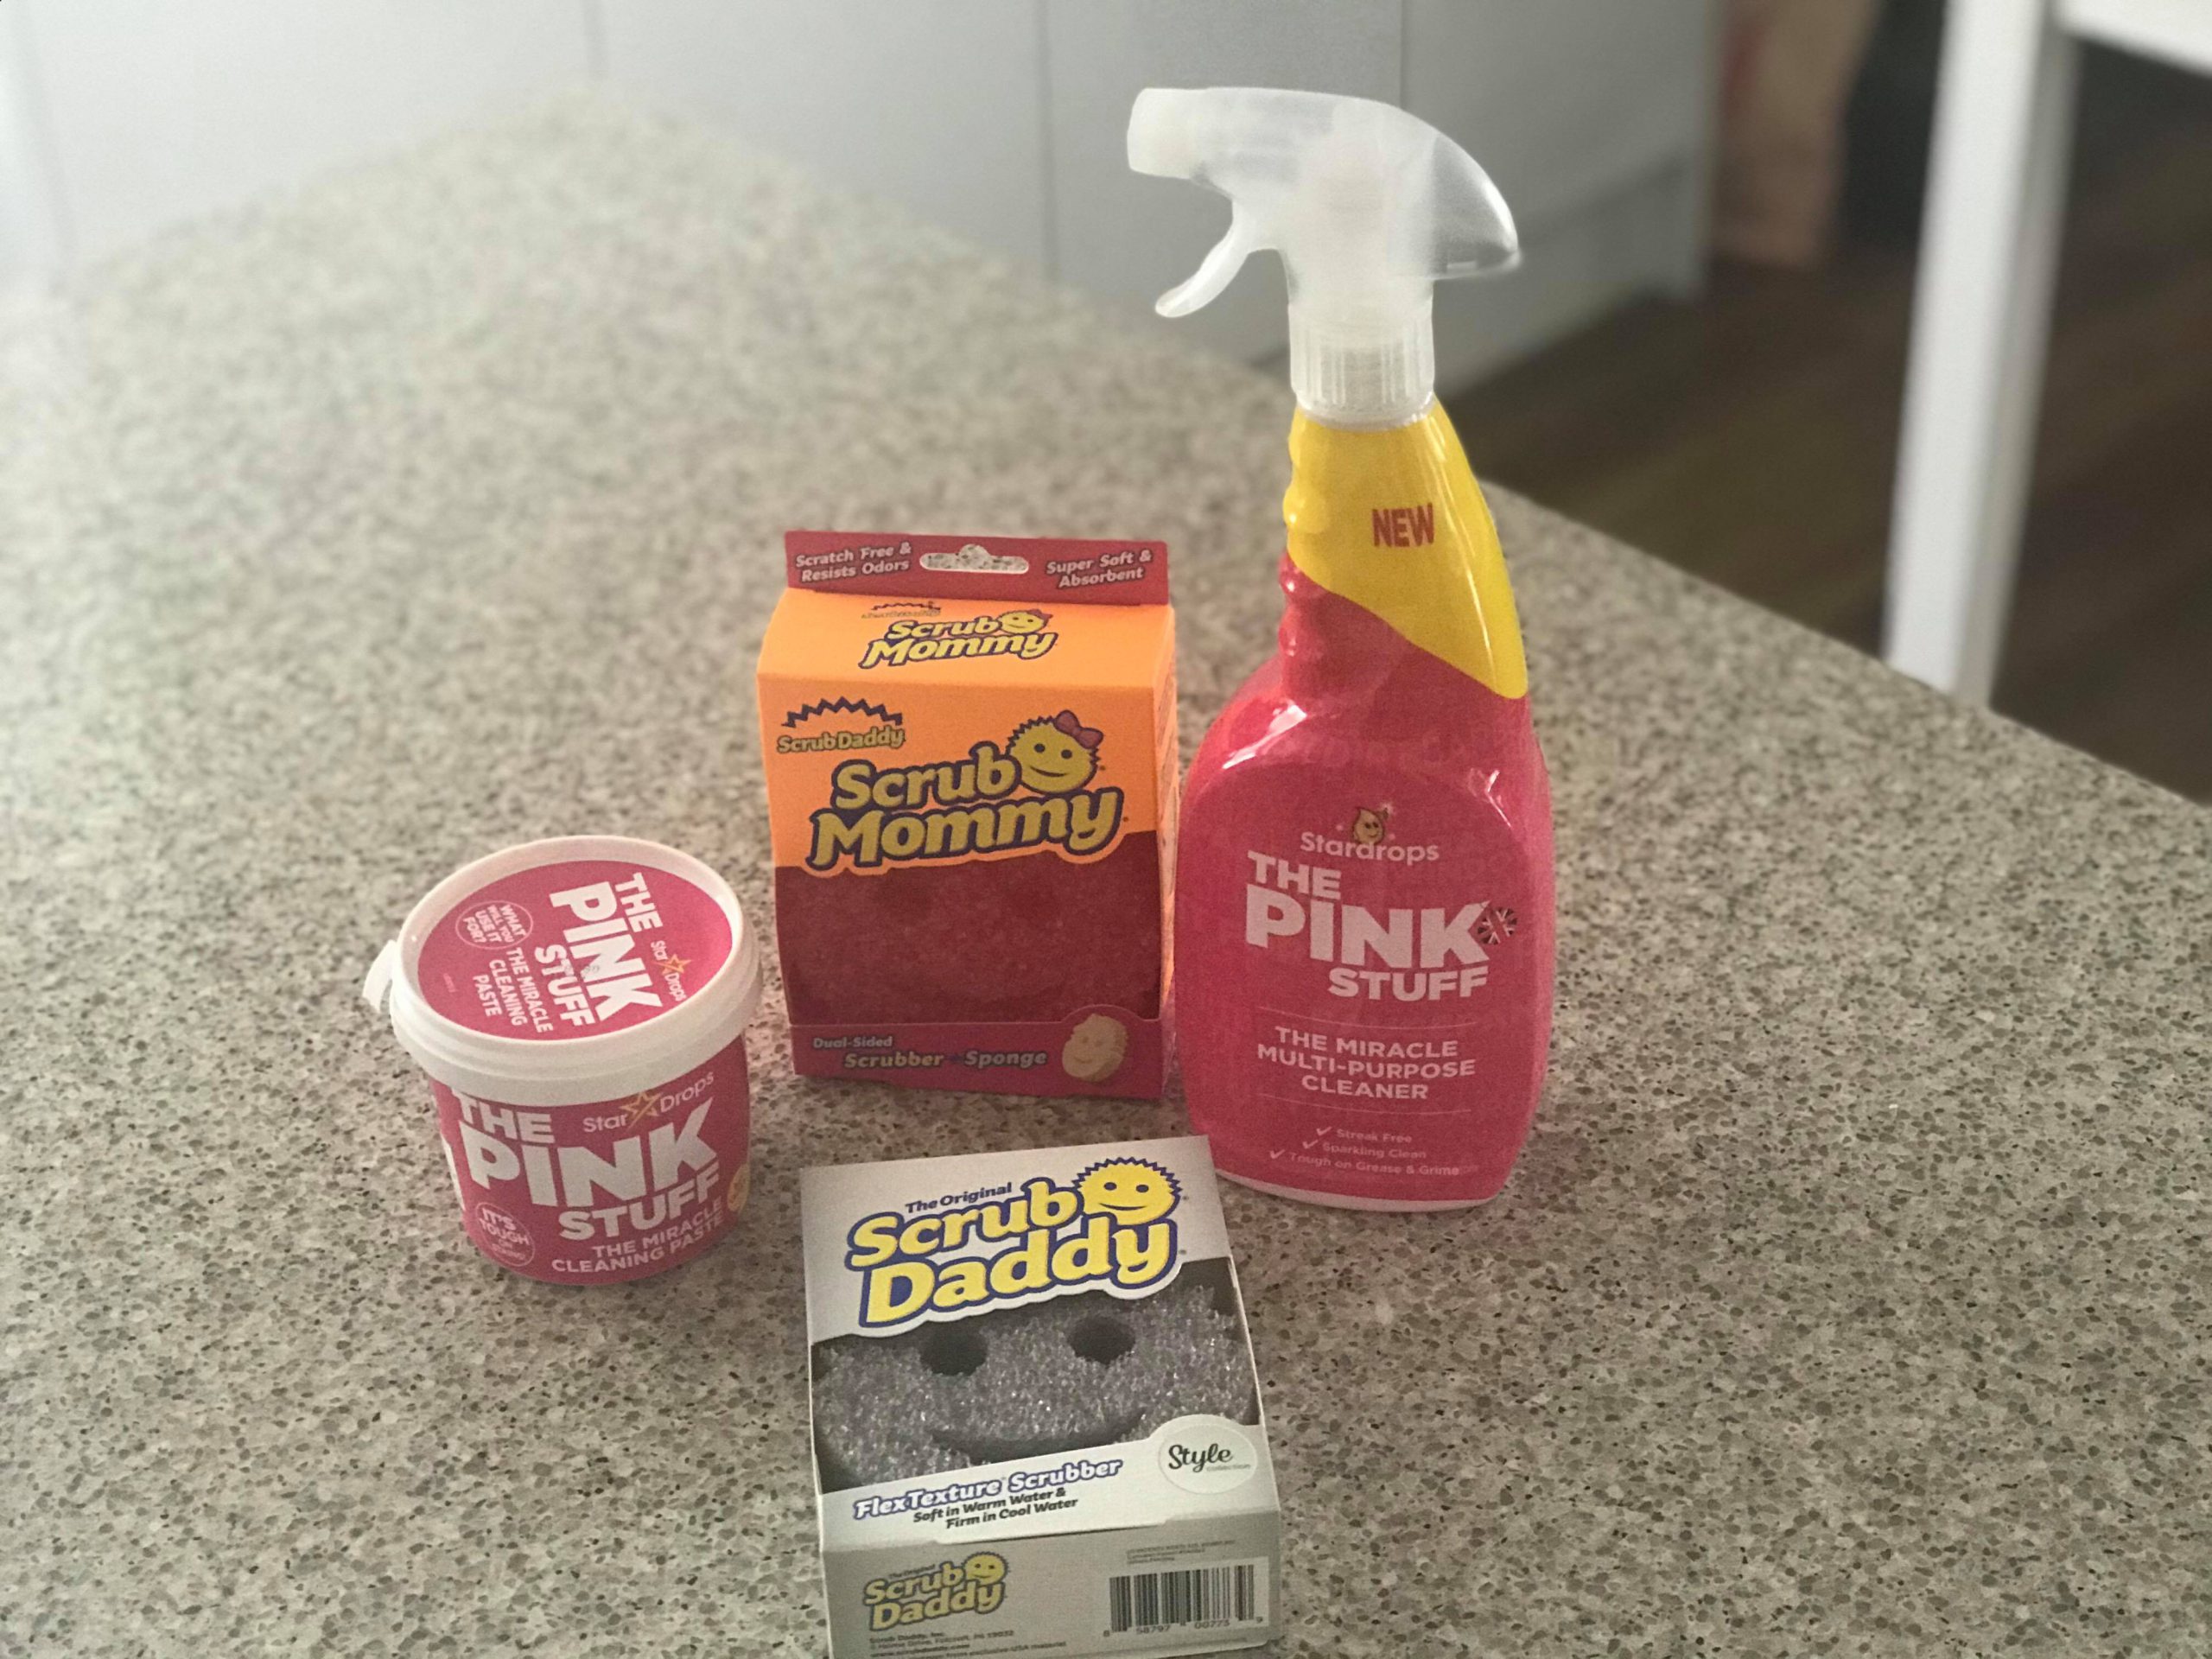 https://mumslounge.com.au/wp-content/uploads/2021/03/the-pink-stuff-cleaning-products-review-scaled.jpg